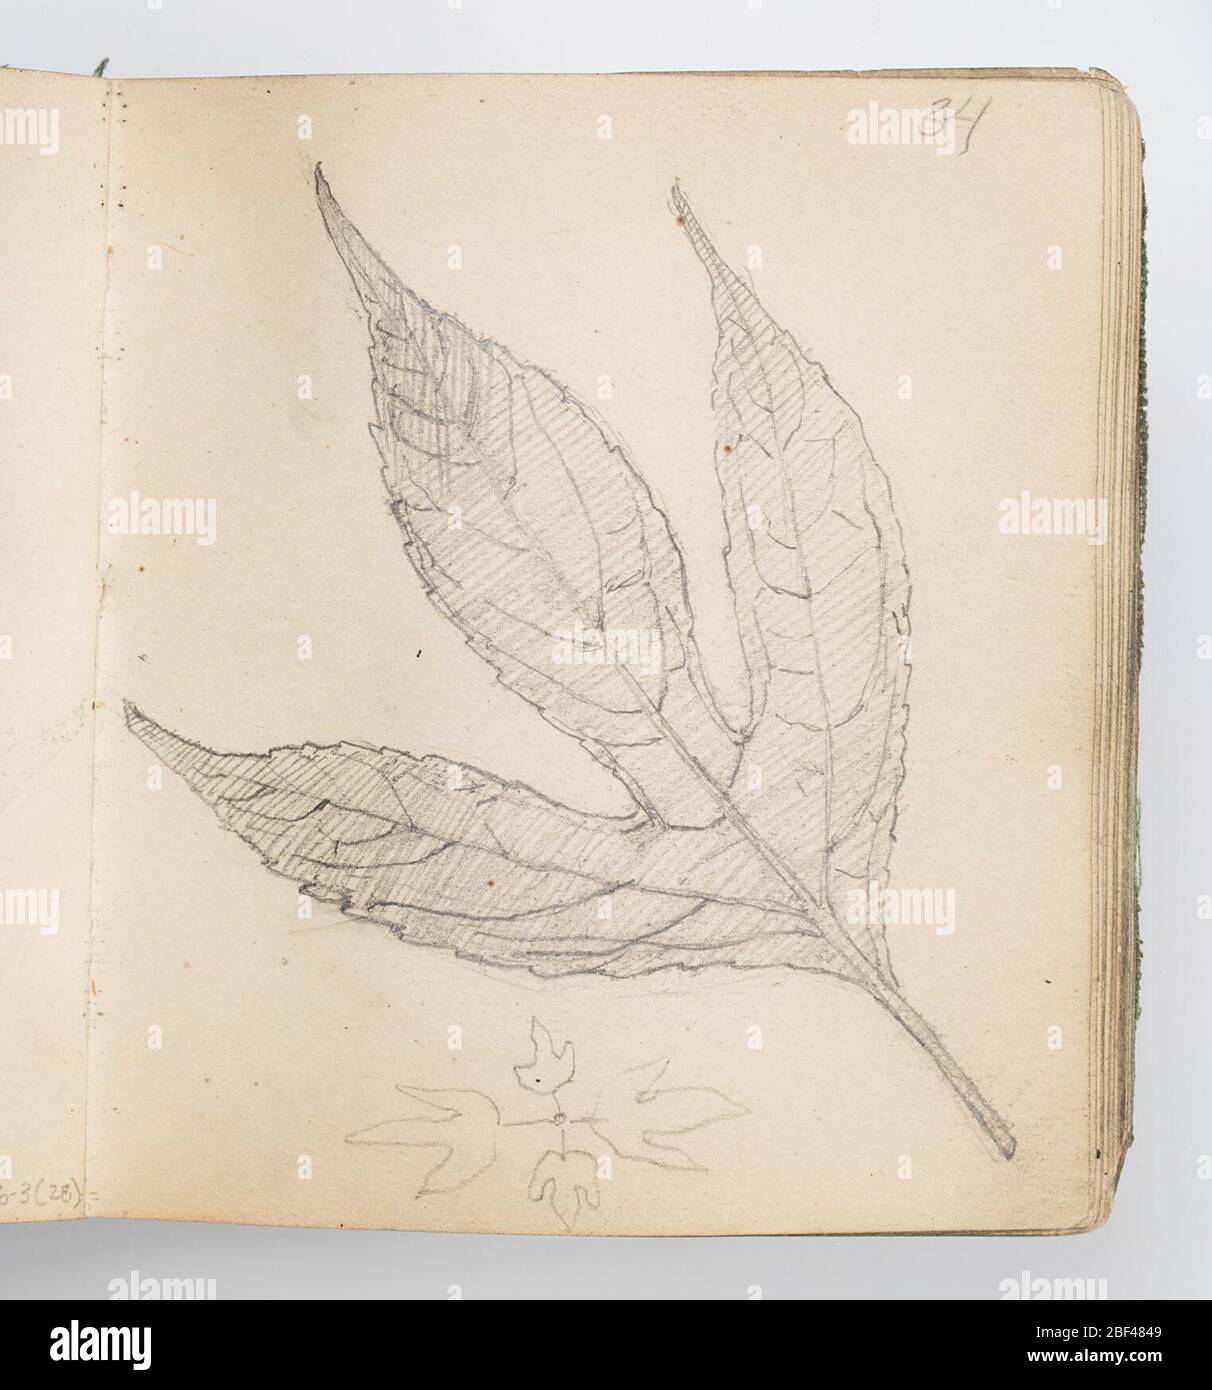 Sketchbook Page ThreeLobed Leaf. Recto: Study of a three-lobed leaf; sketch of decorative motif below, with four symmetrical three-lobed leaves.Verso: Sketch of two decorative friezes, above, and pattern with flowers, below. Stock Photo